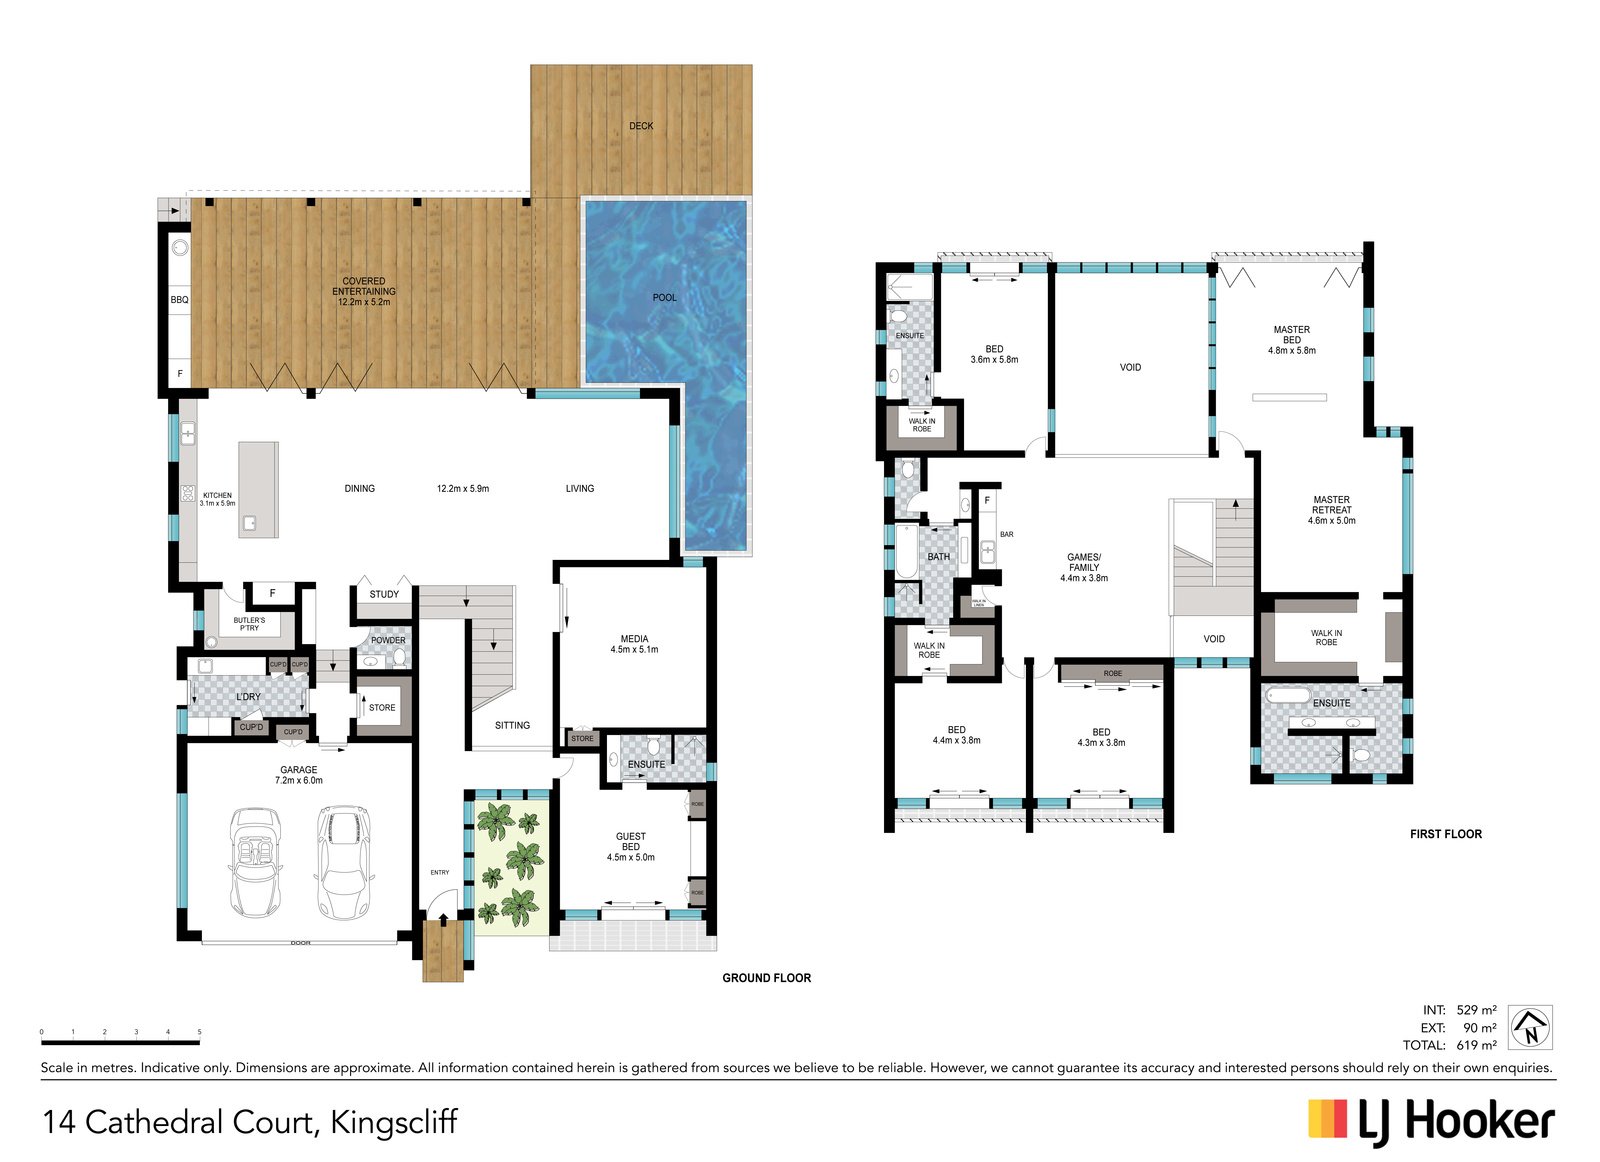 126_Open2view_ID781233-14_Cathedral_Court__Kingscliff.jpg